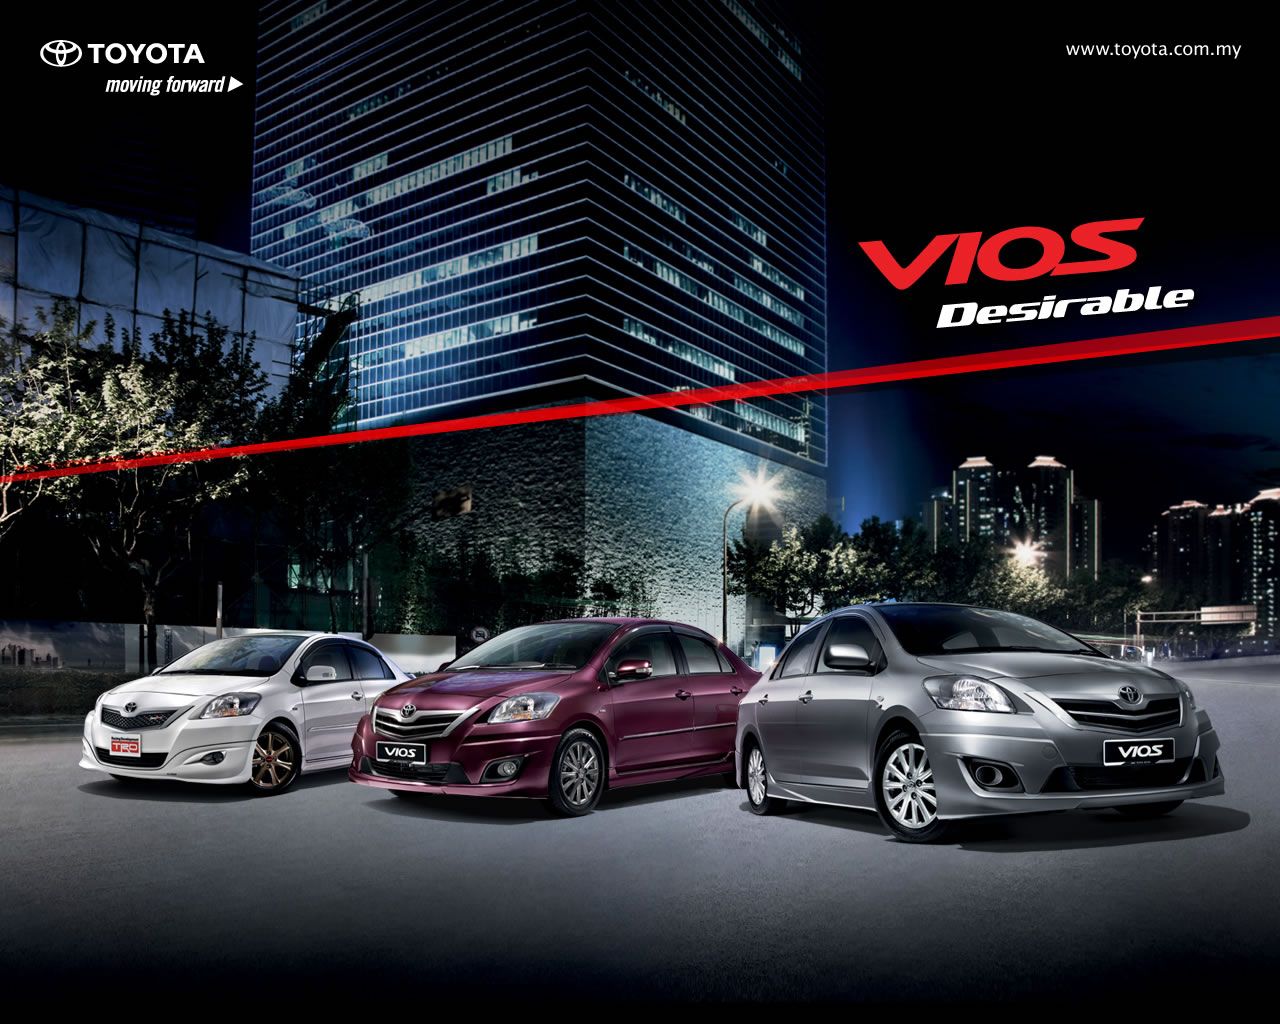 Toyota Vios Image, Wallpaper and Photo